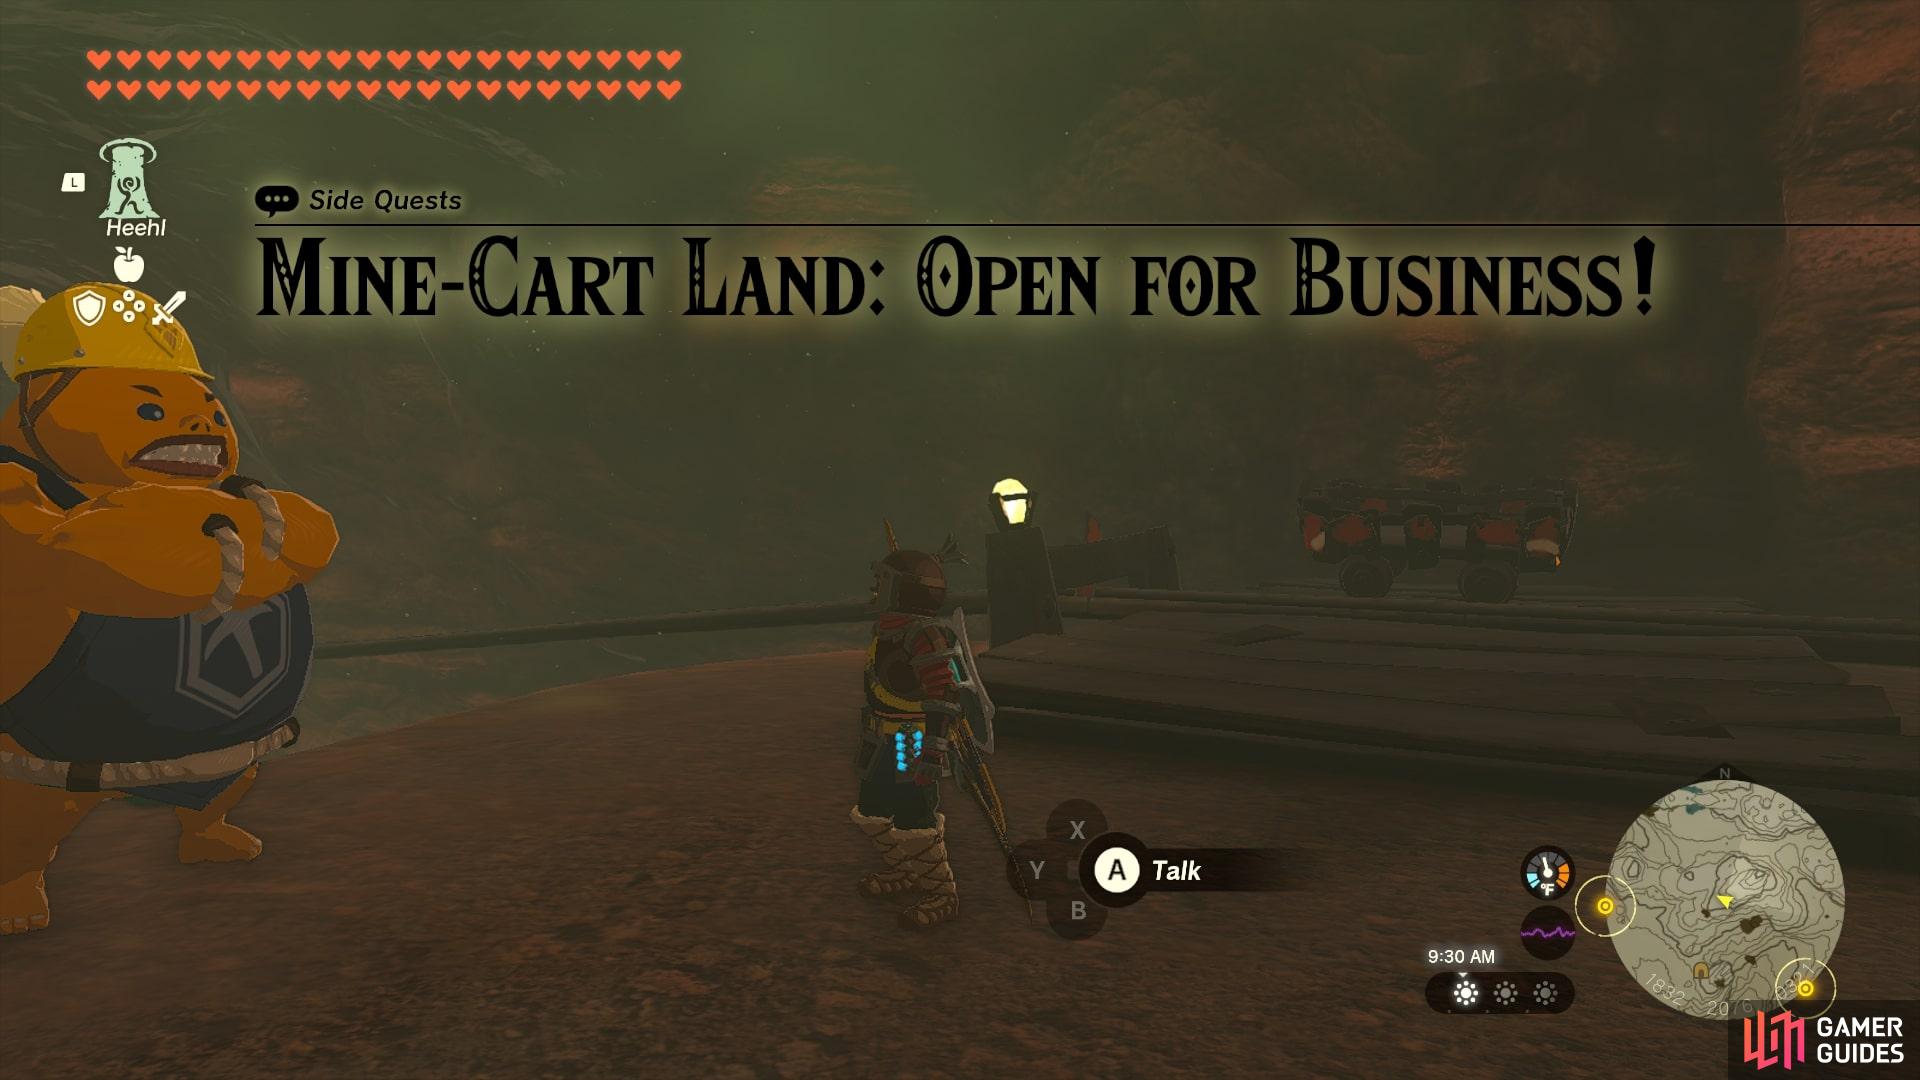 Starting Mine-Cart Land: Open For Business.